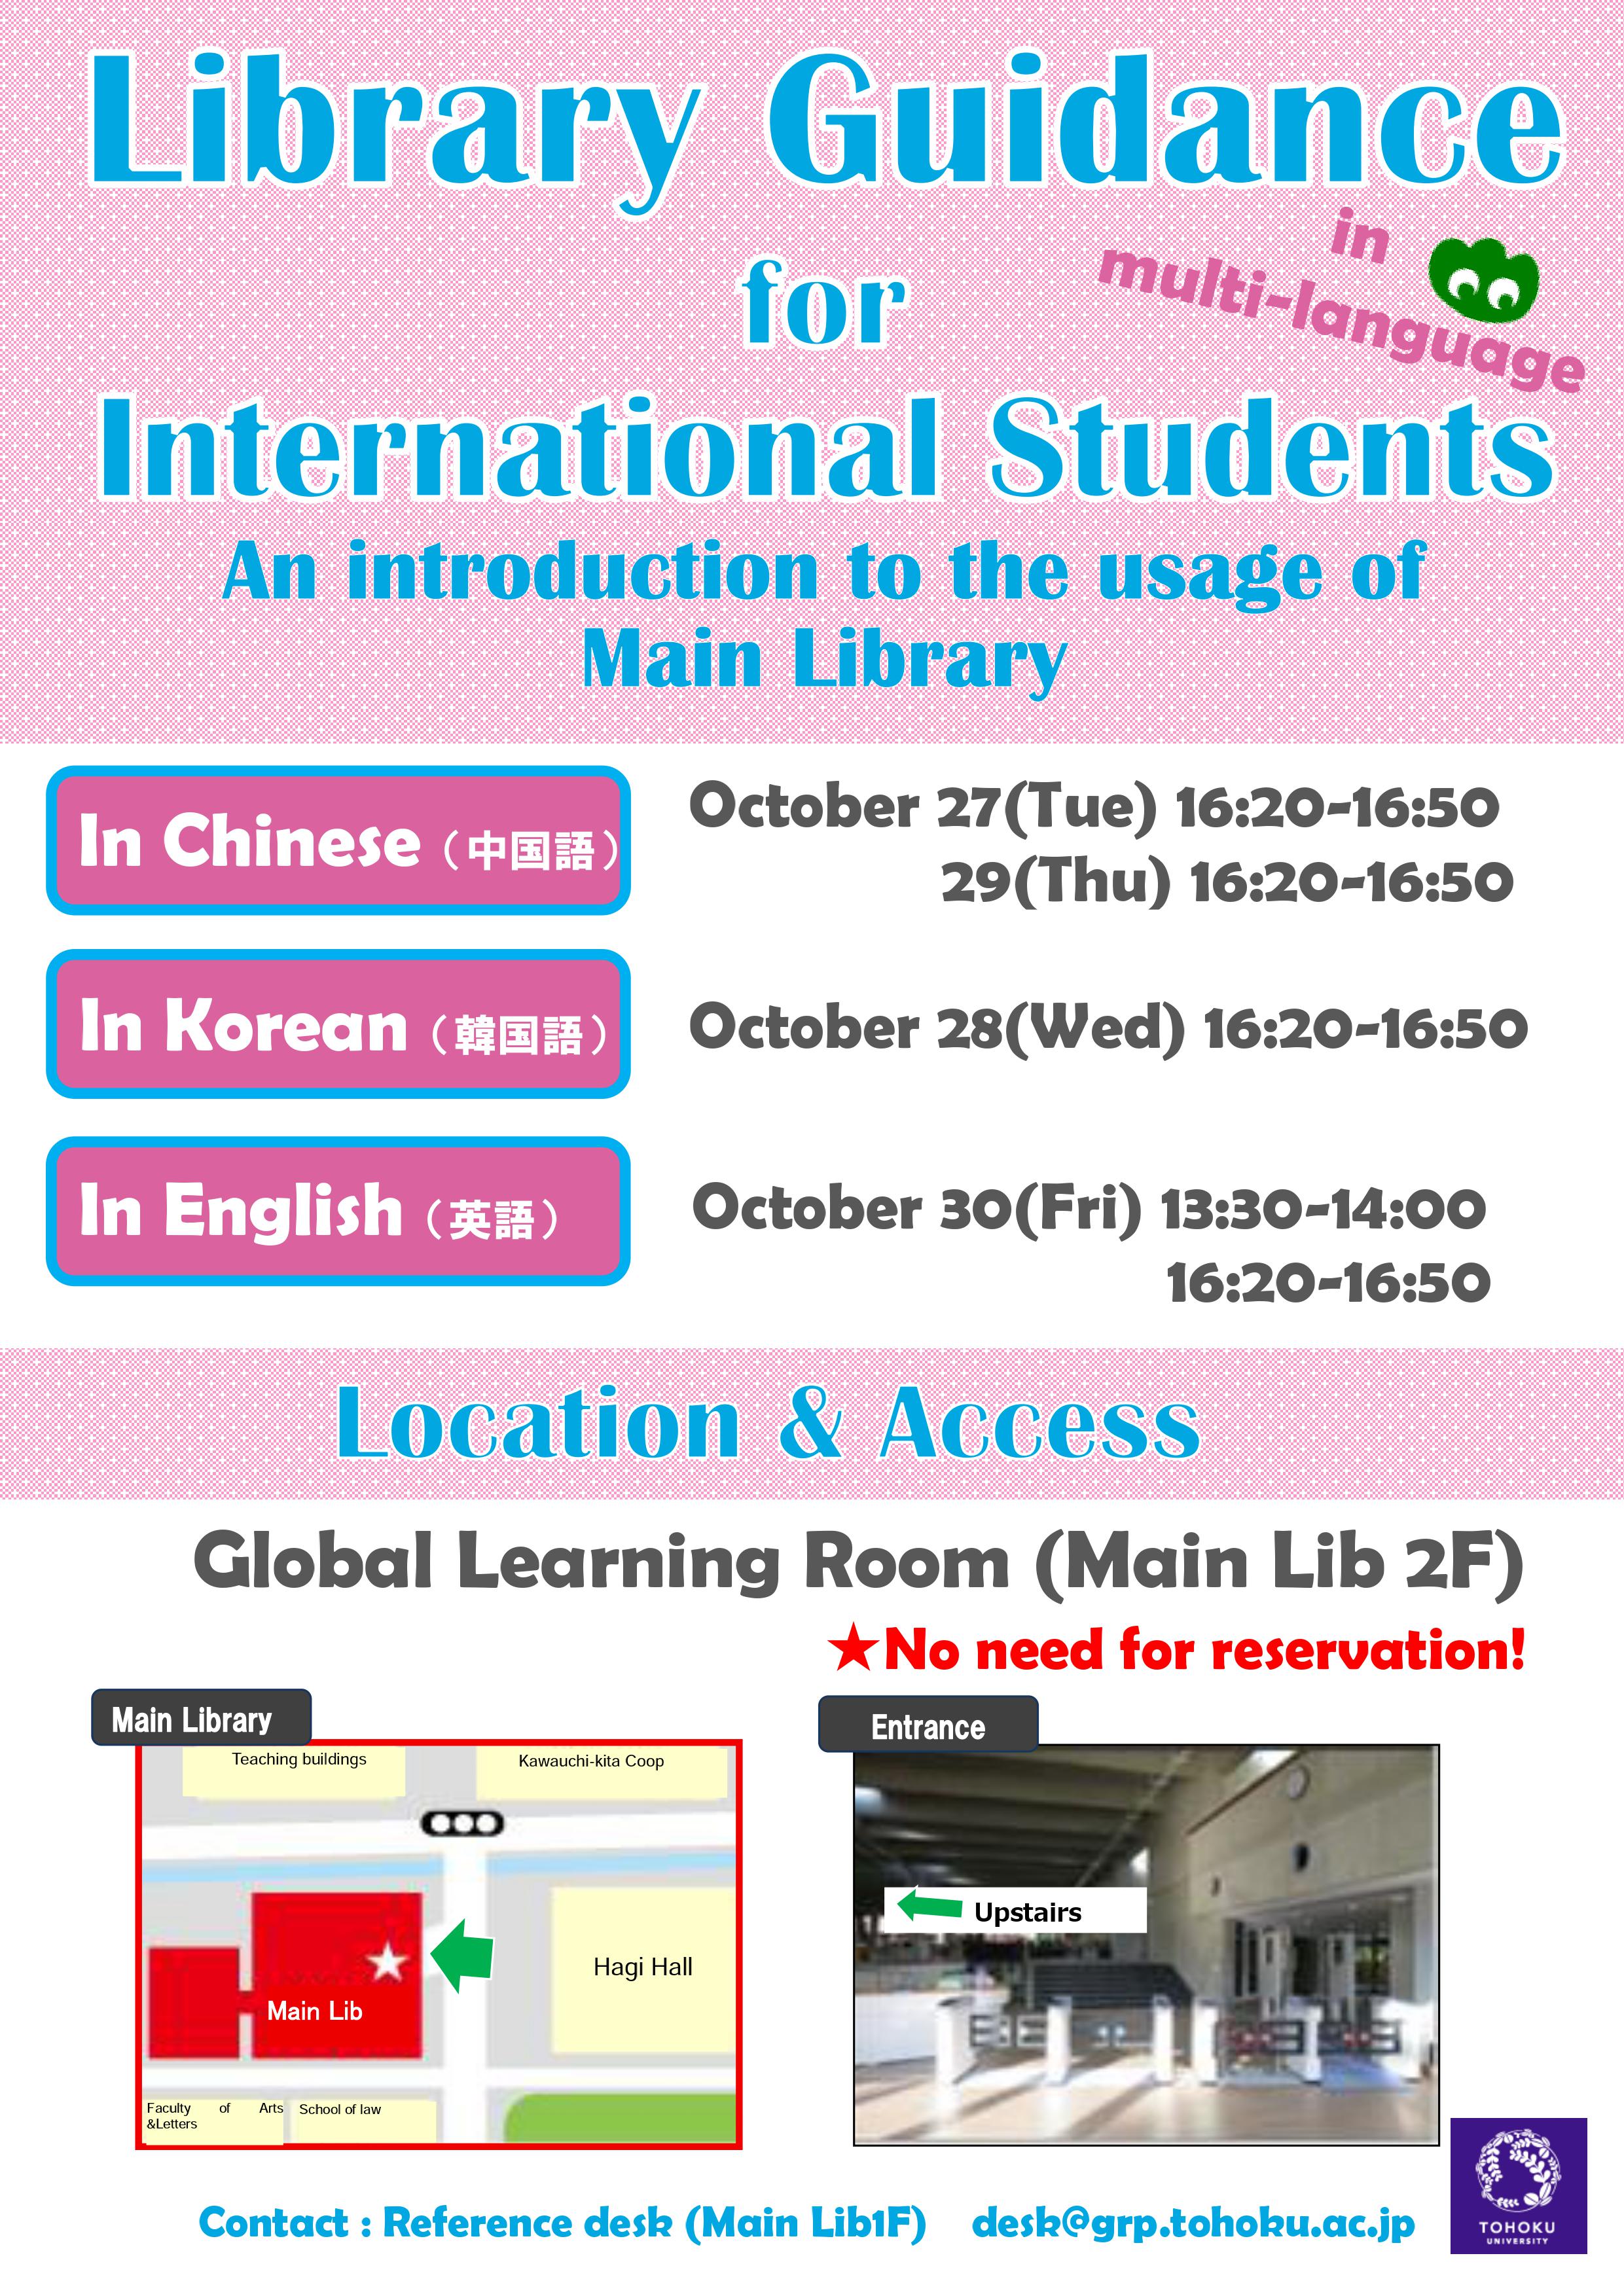 How to Search for materials & Library Guidance for International Students